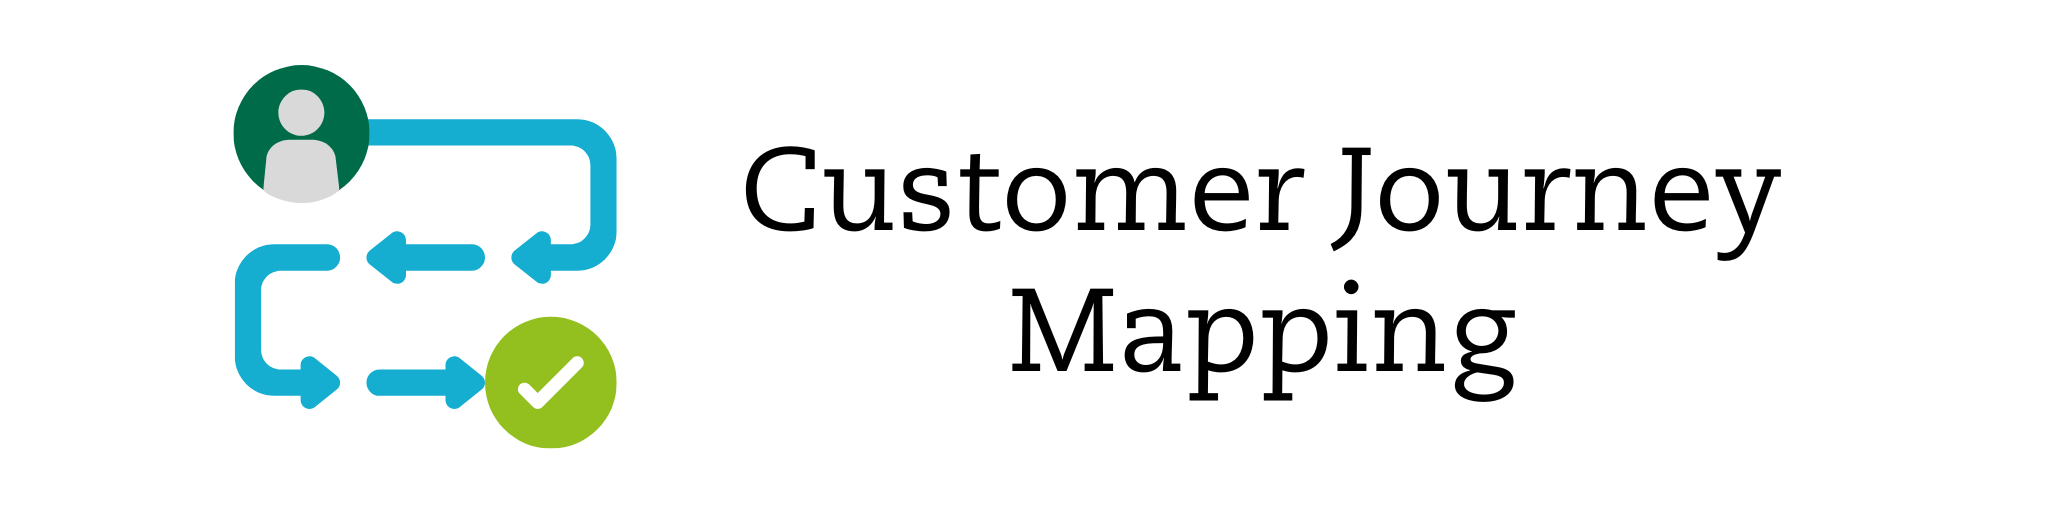 Customer Journey Mapping Landing Page Banner